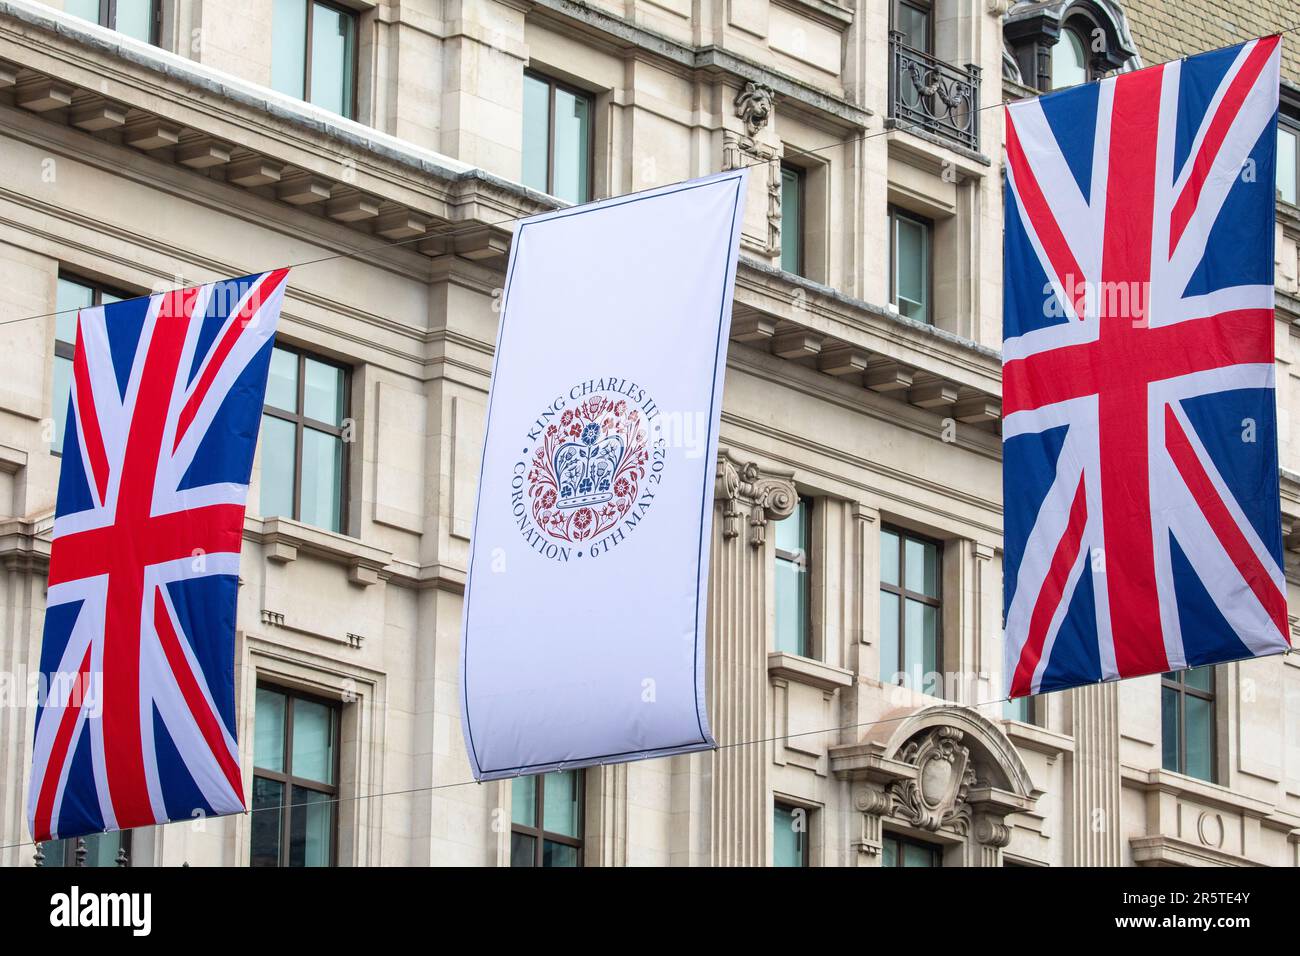 London, UK - April 30th 2023: Union Flags and Banners on Regent Street in London, commemorating the upcoming Coronation of King Charles III. Stock Photo